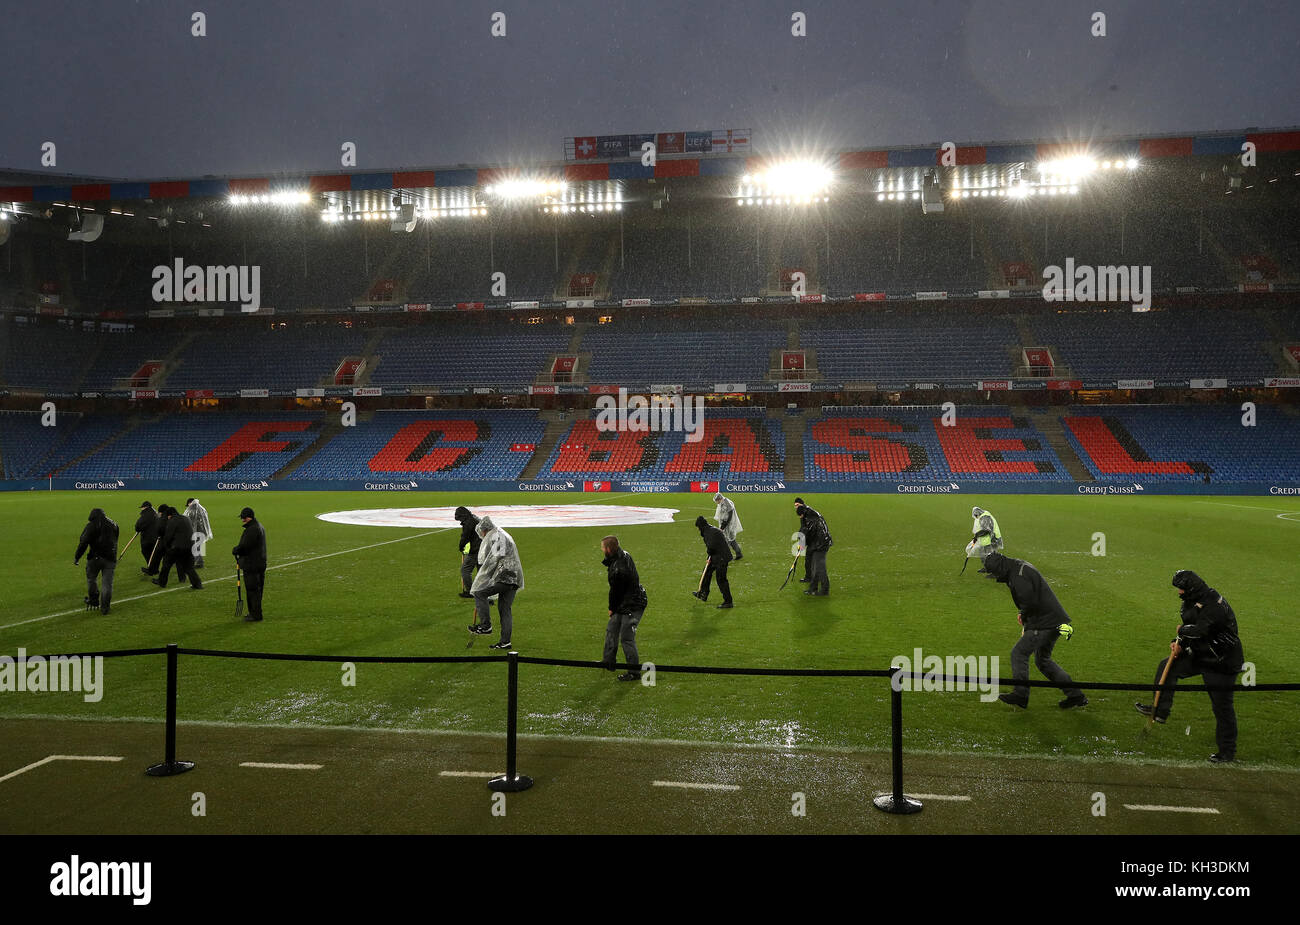 Ground staff use pitchforks to help drain the rainwater from the pitch before the FIFA World Cup Qualifying second leg match at St Jakob Park, Basel. Stock Photo